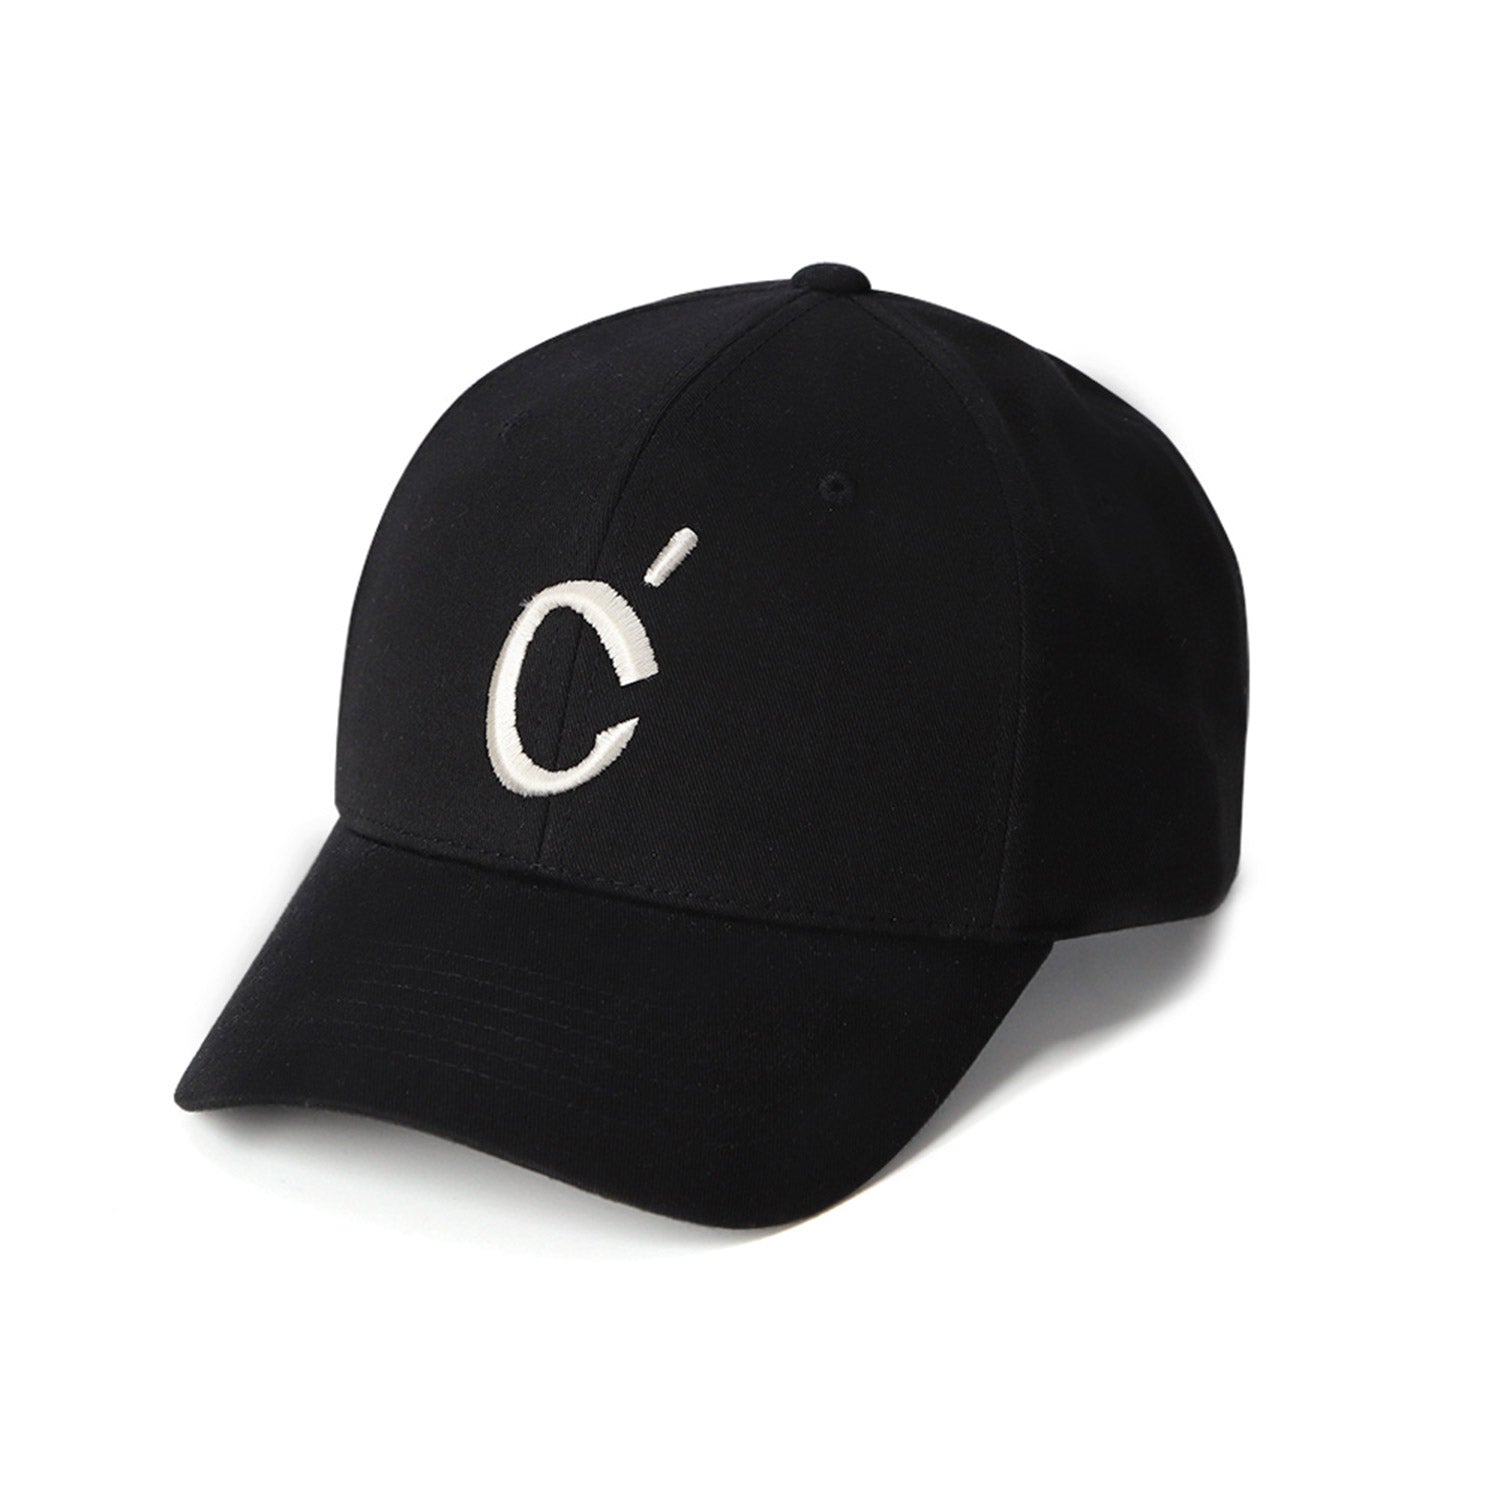 7 COLLEGE ONE POINT HARD BALL CAP